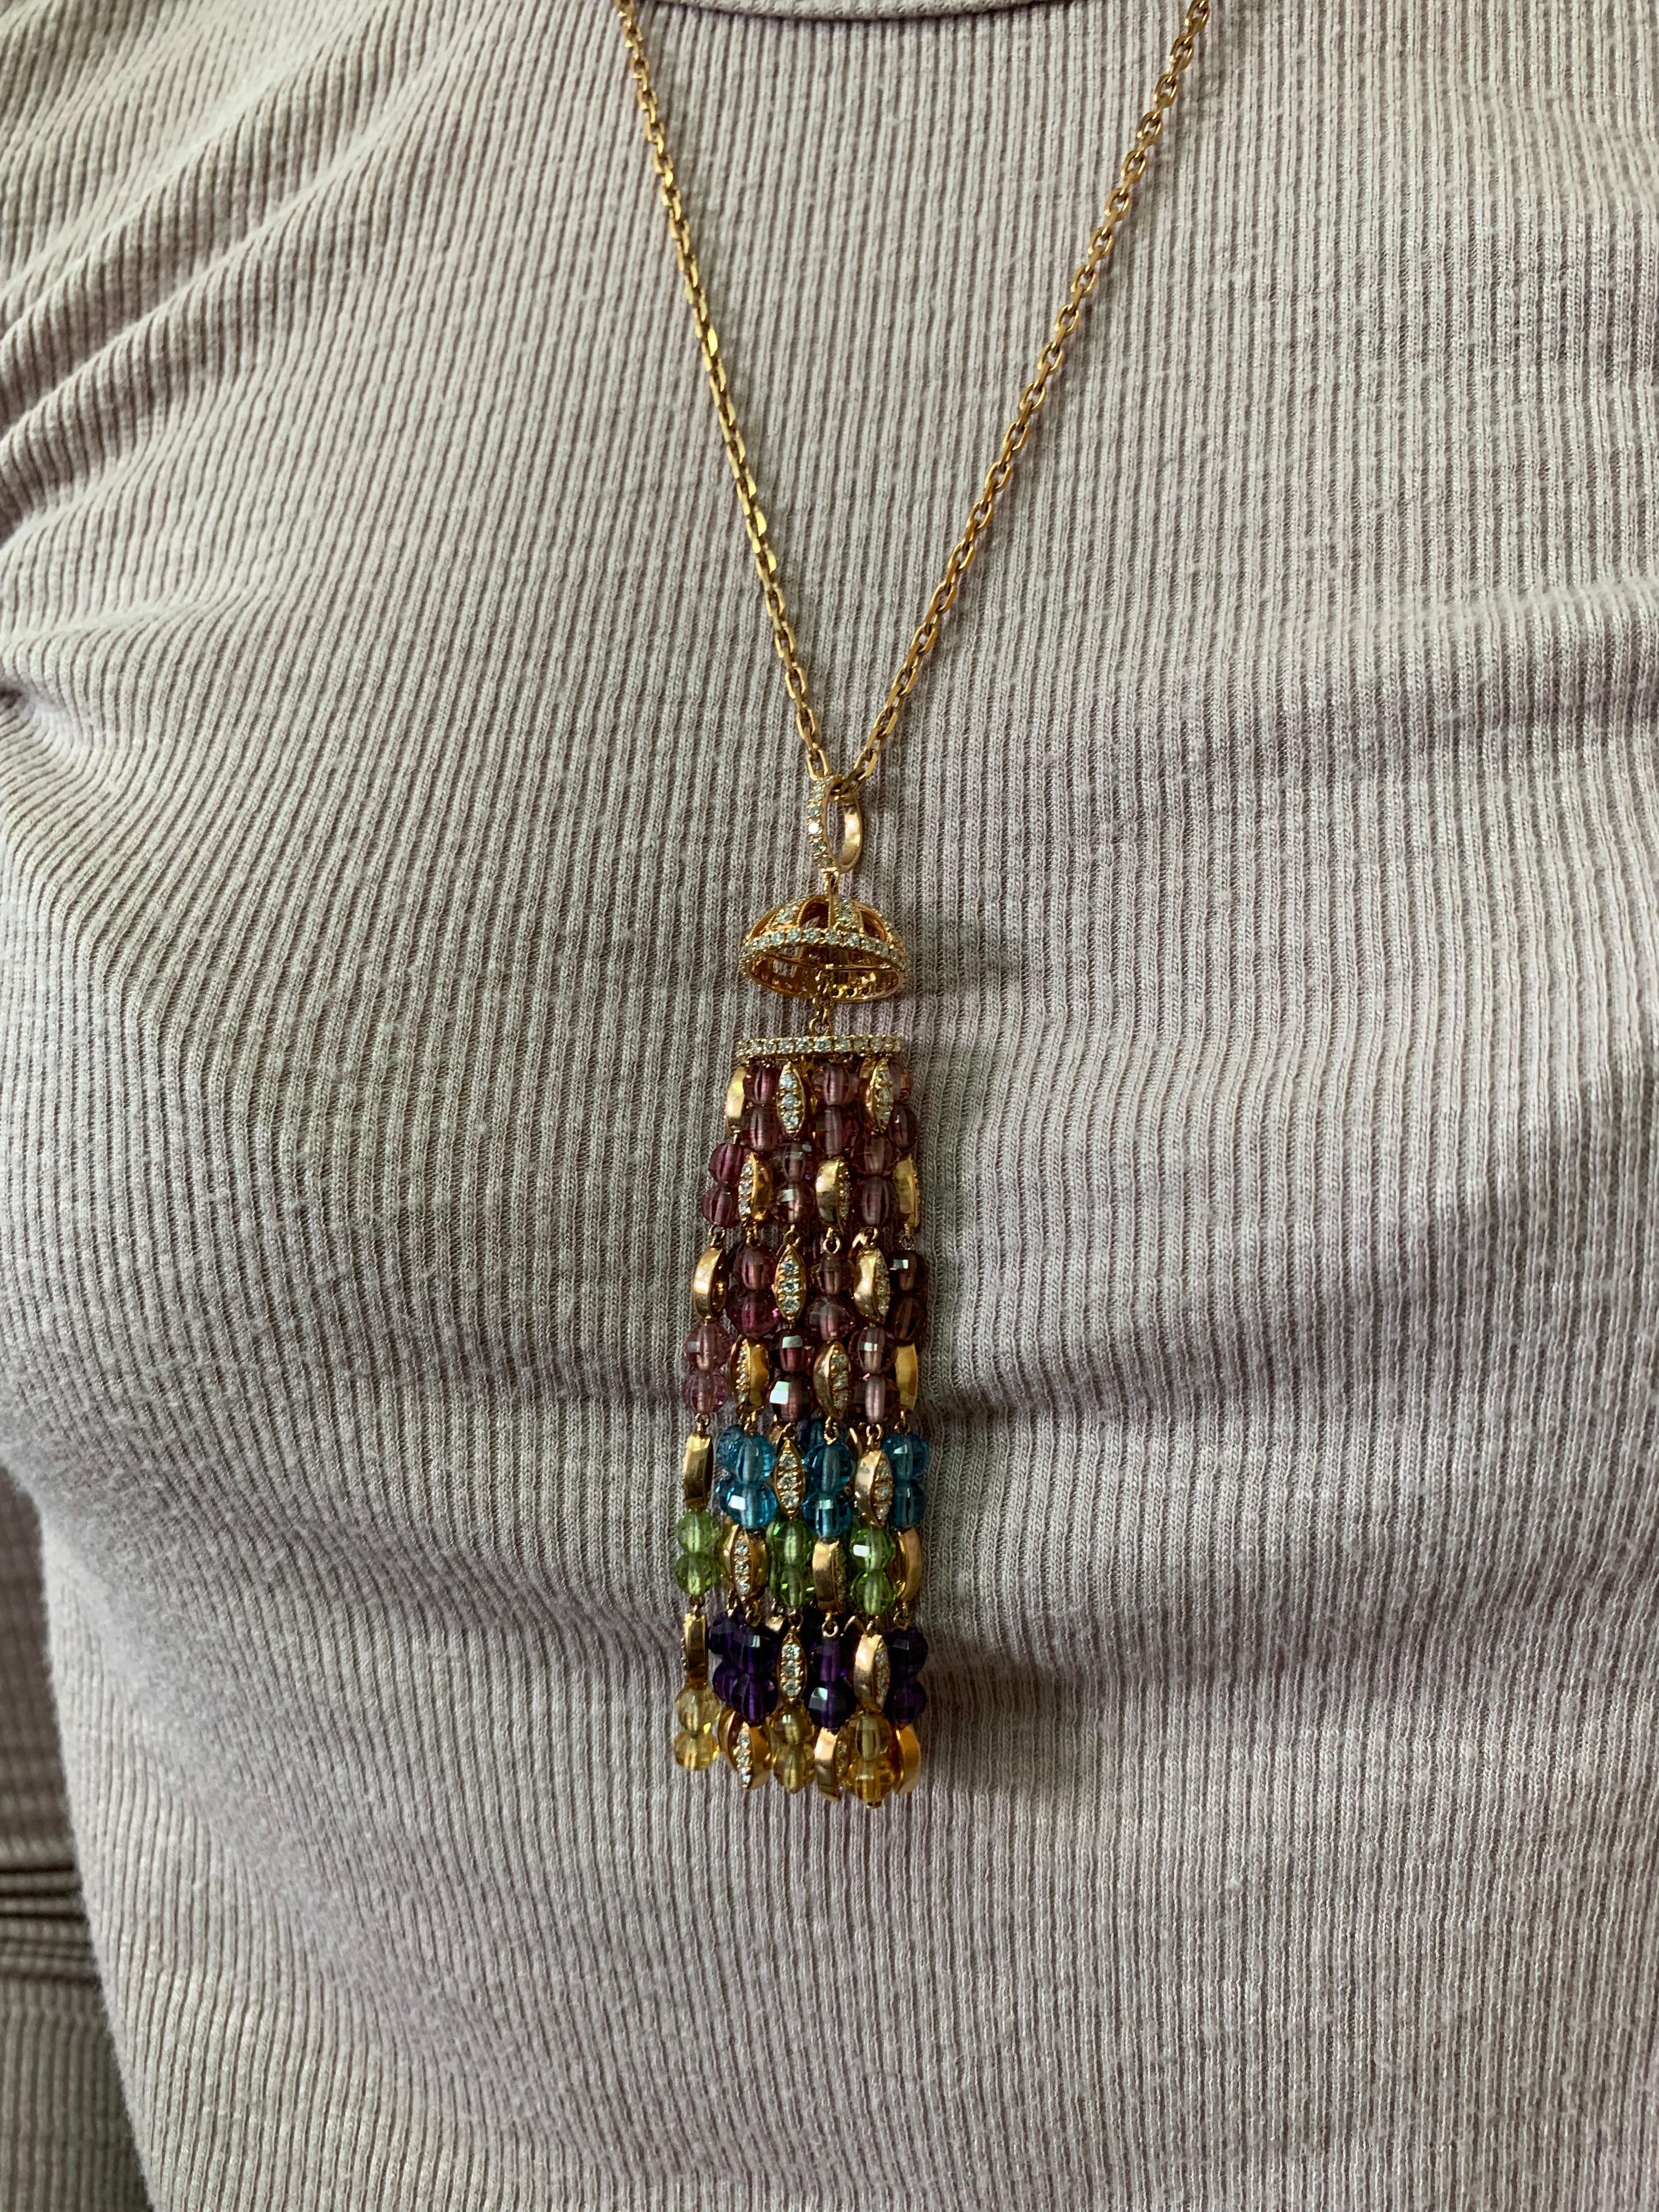 In honor of #PrideMonth, Sunita presents a rainbow beaded necklace which elegantly dangles. In support of love, equality and unity, Sunita uses various color gemstones to bring forward a rainbow effect. This is a light and fun drop necklace with a